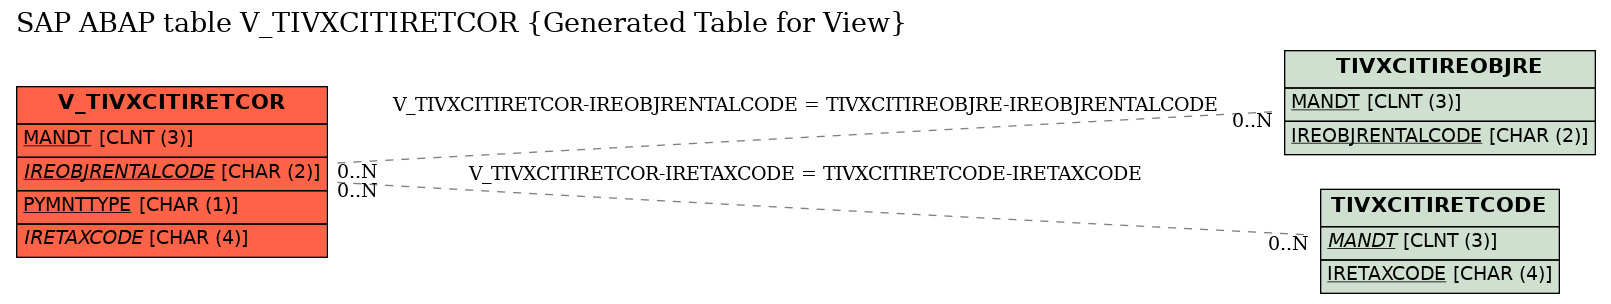 E-R Diagram for table V_TIVXCITIRETCOR (Generated Table for View)